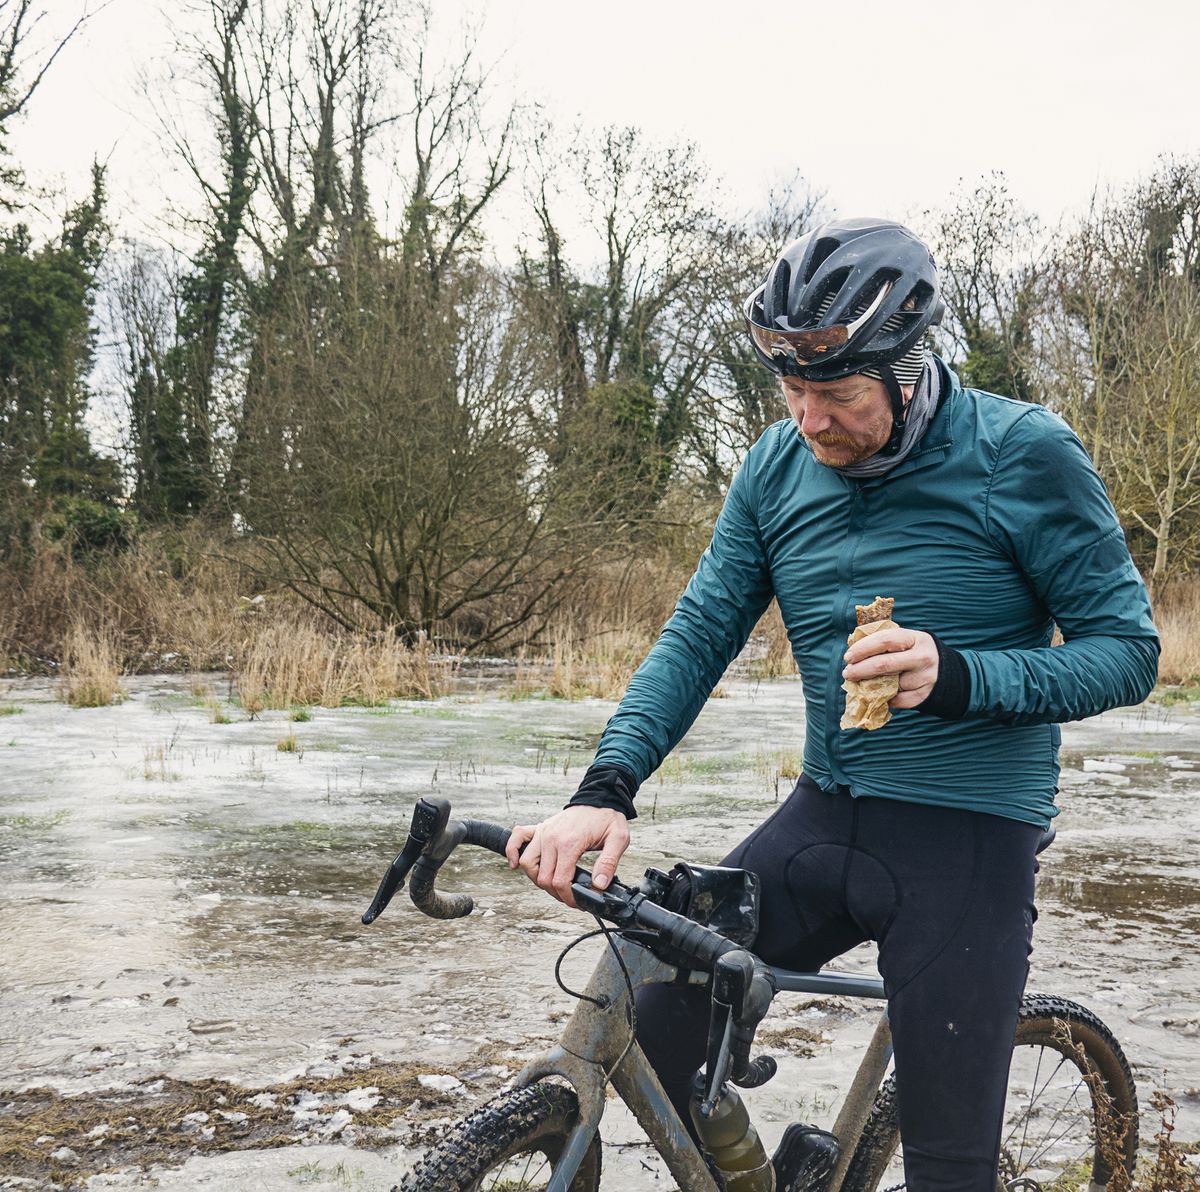 Cycling in Cold Weather: How to Dress, Fuel, and Hydrate